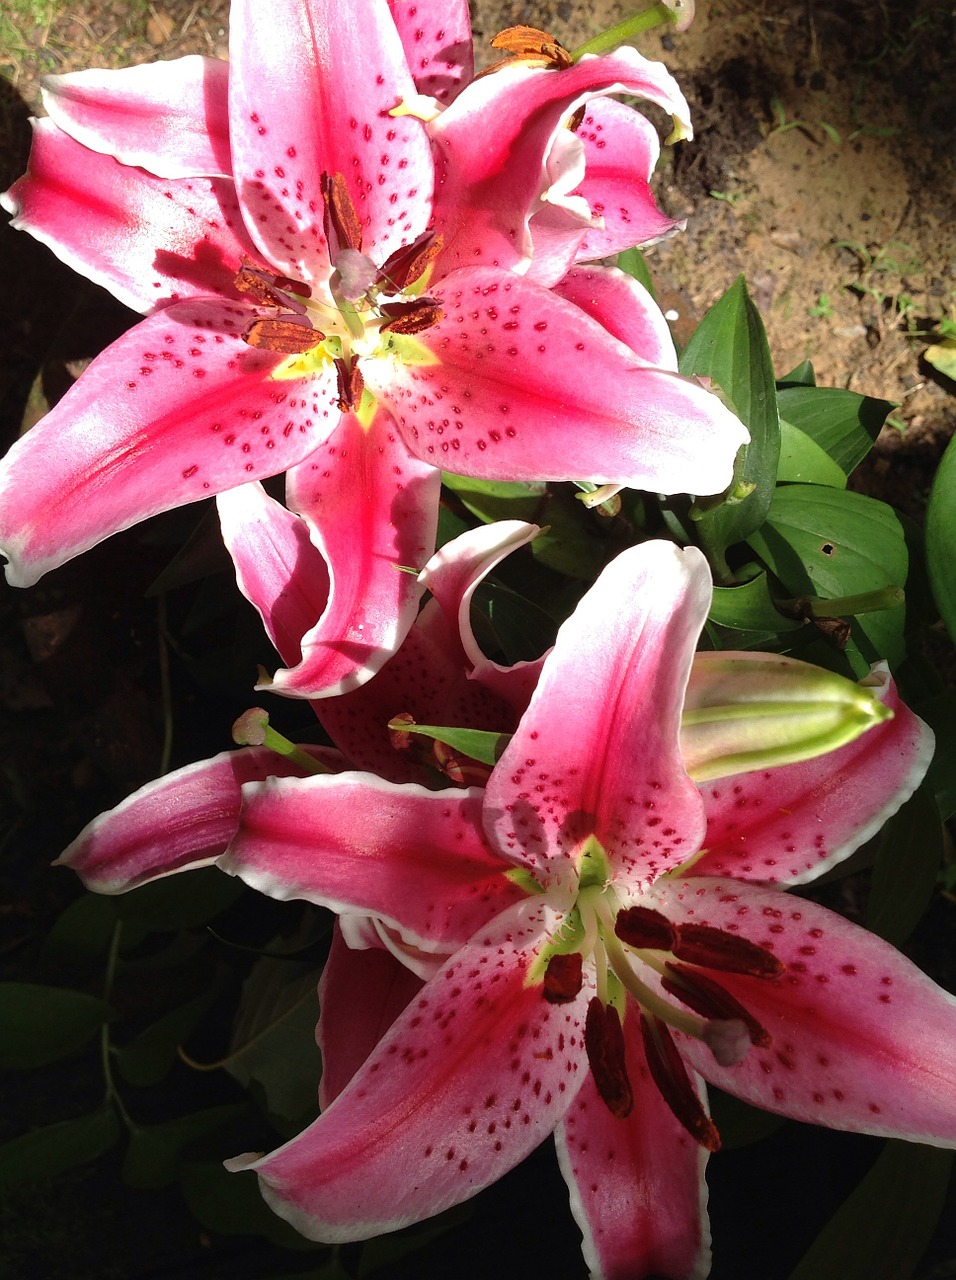 Lily,stargazer,pink,nature,fragrance - free image from needpix.com